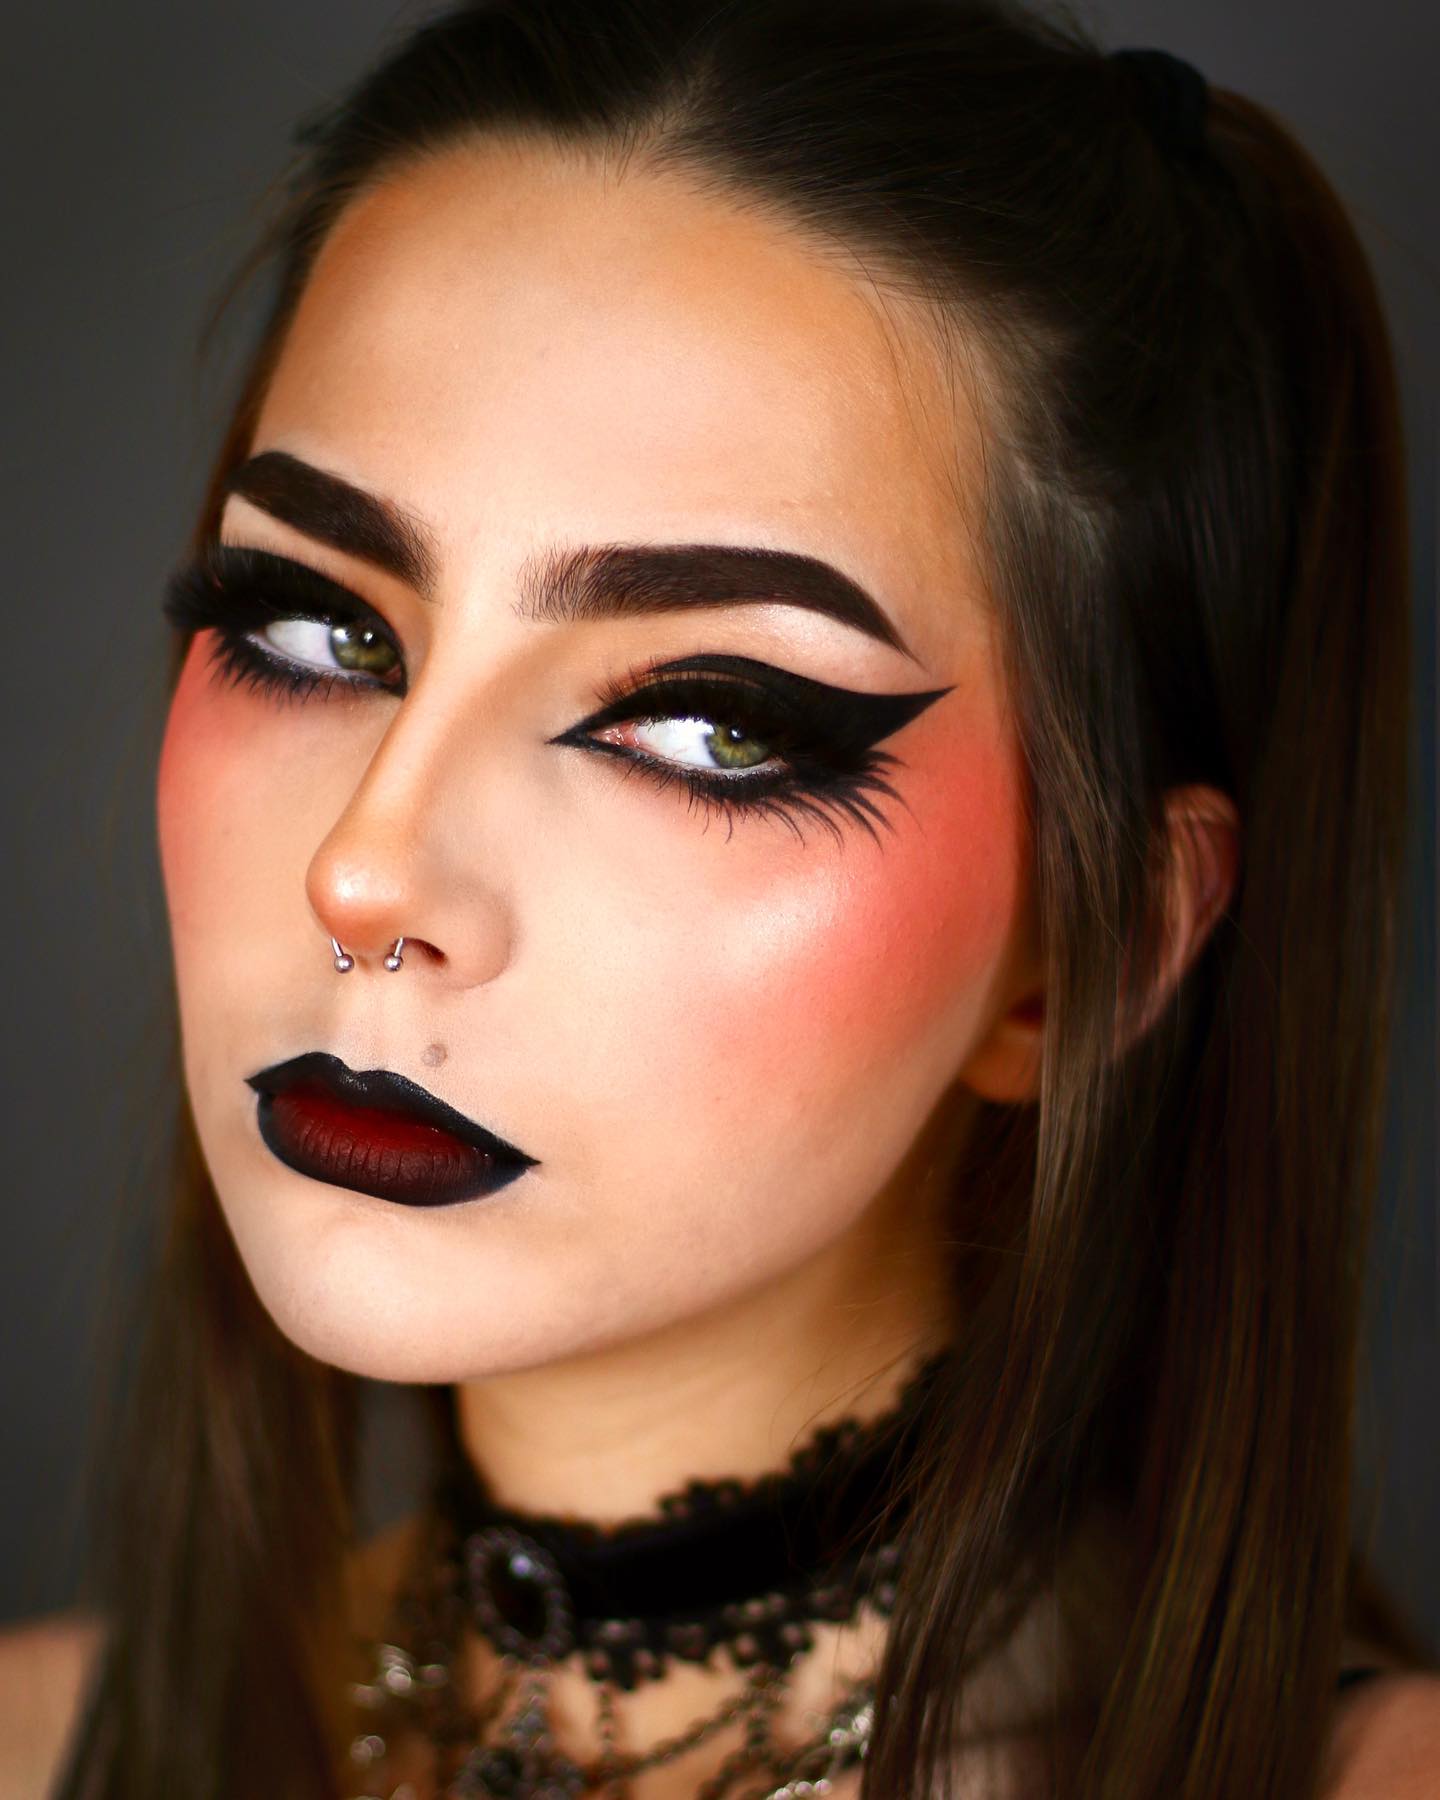 20 Stunning Gothic Makeup Ideas to Embrace Your Dark Side